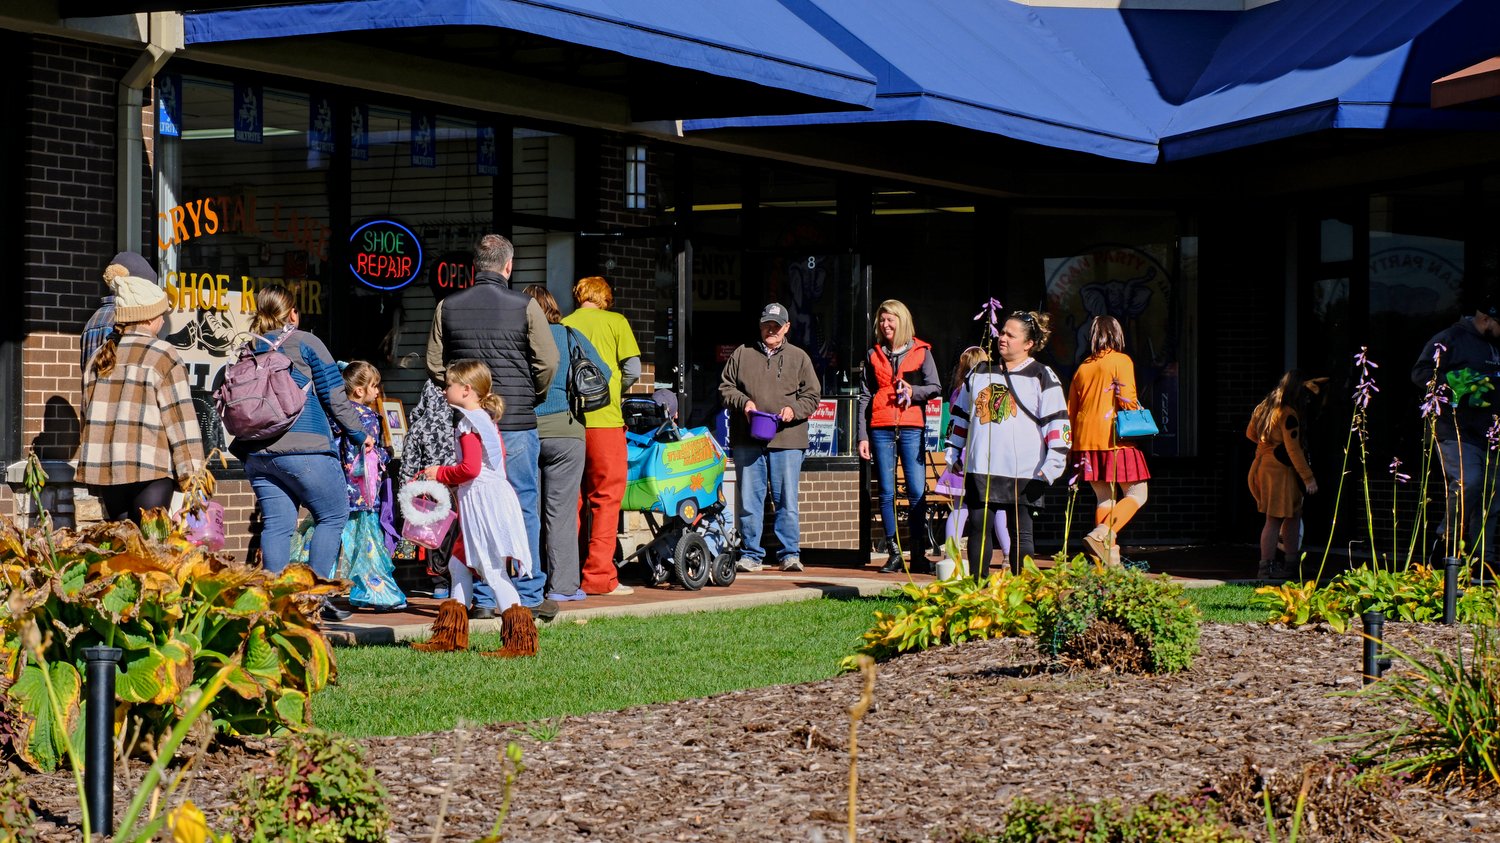 Trick-or-treating outside of the stores.